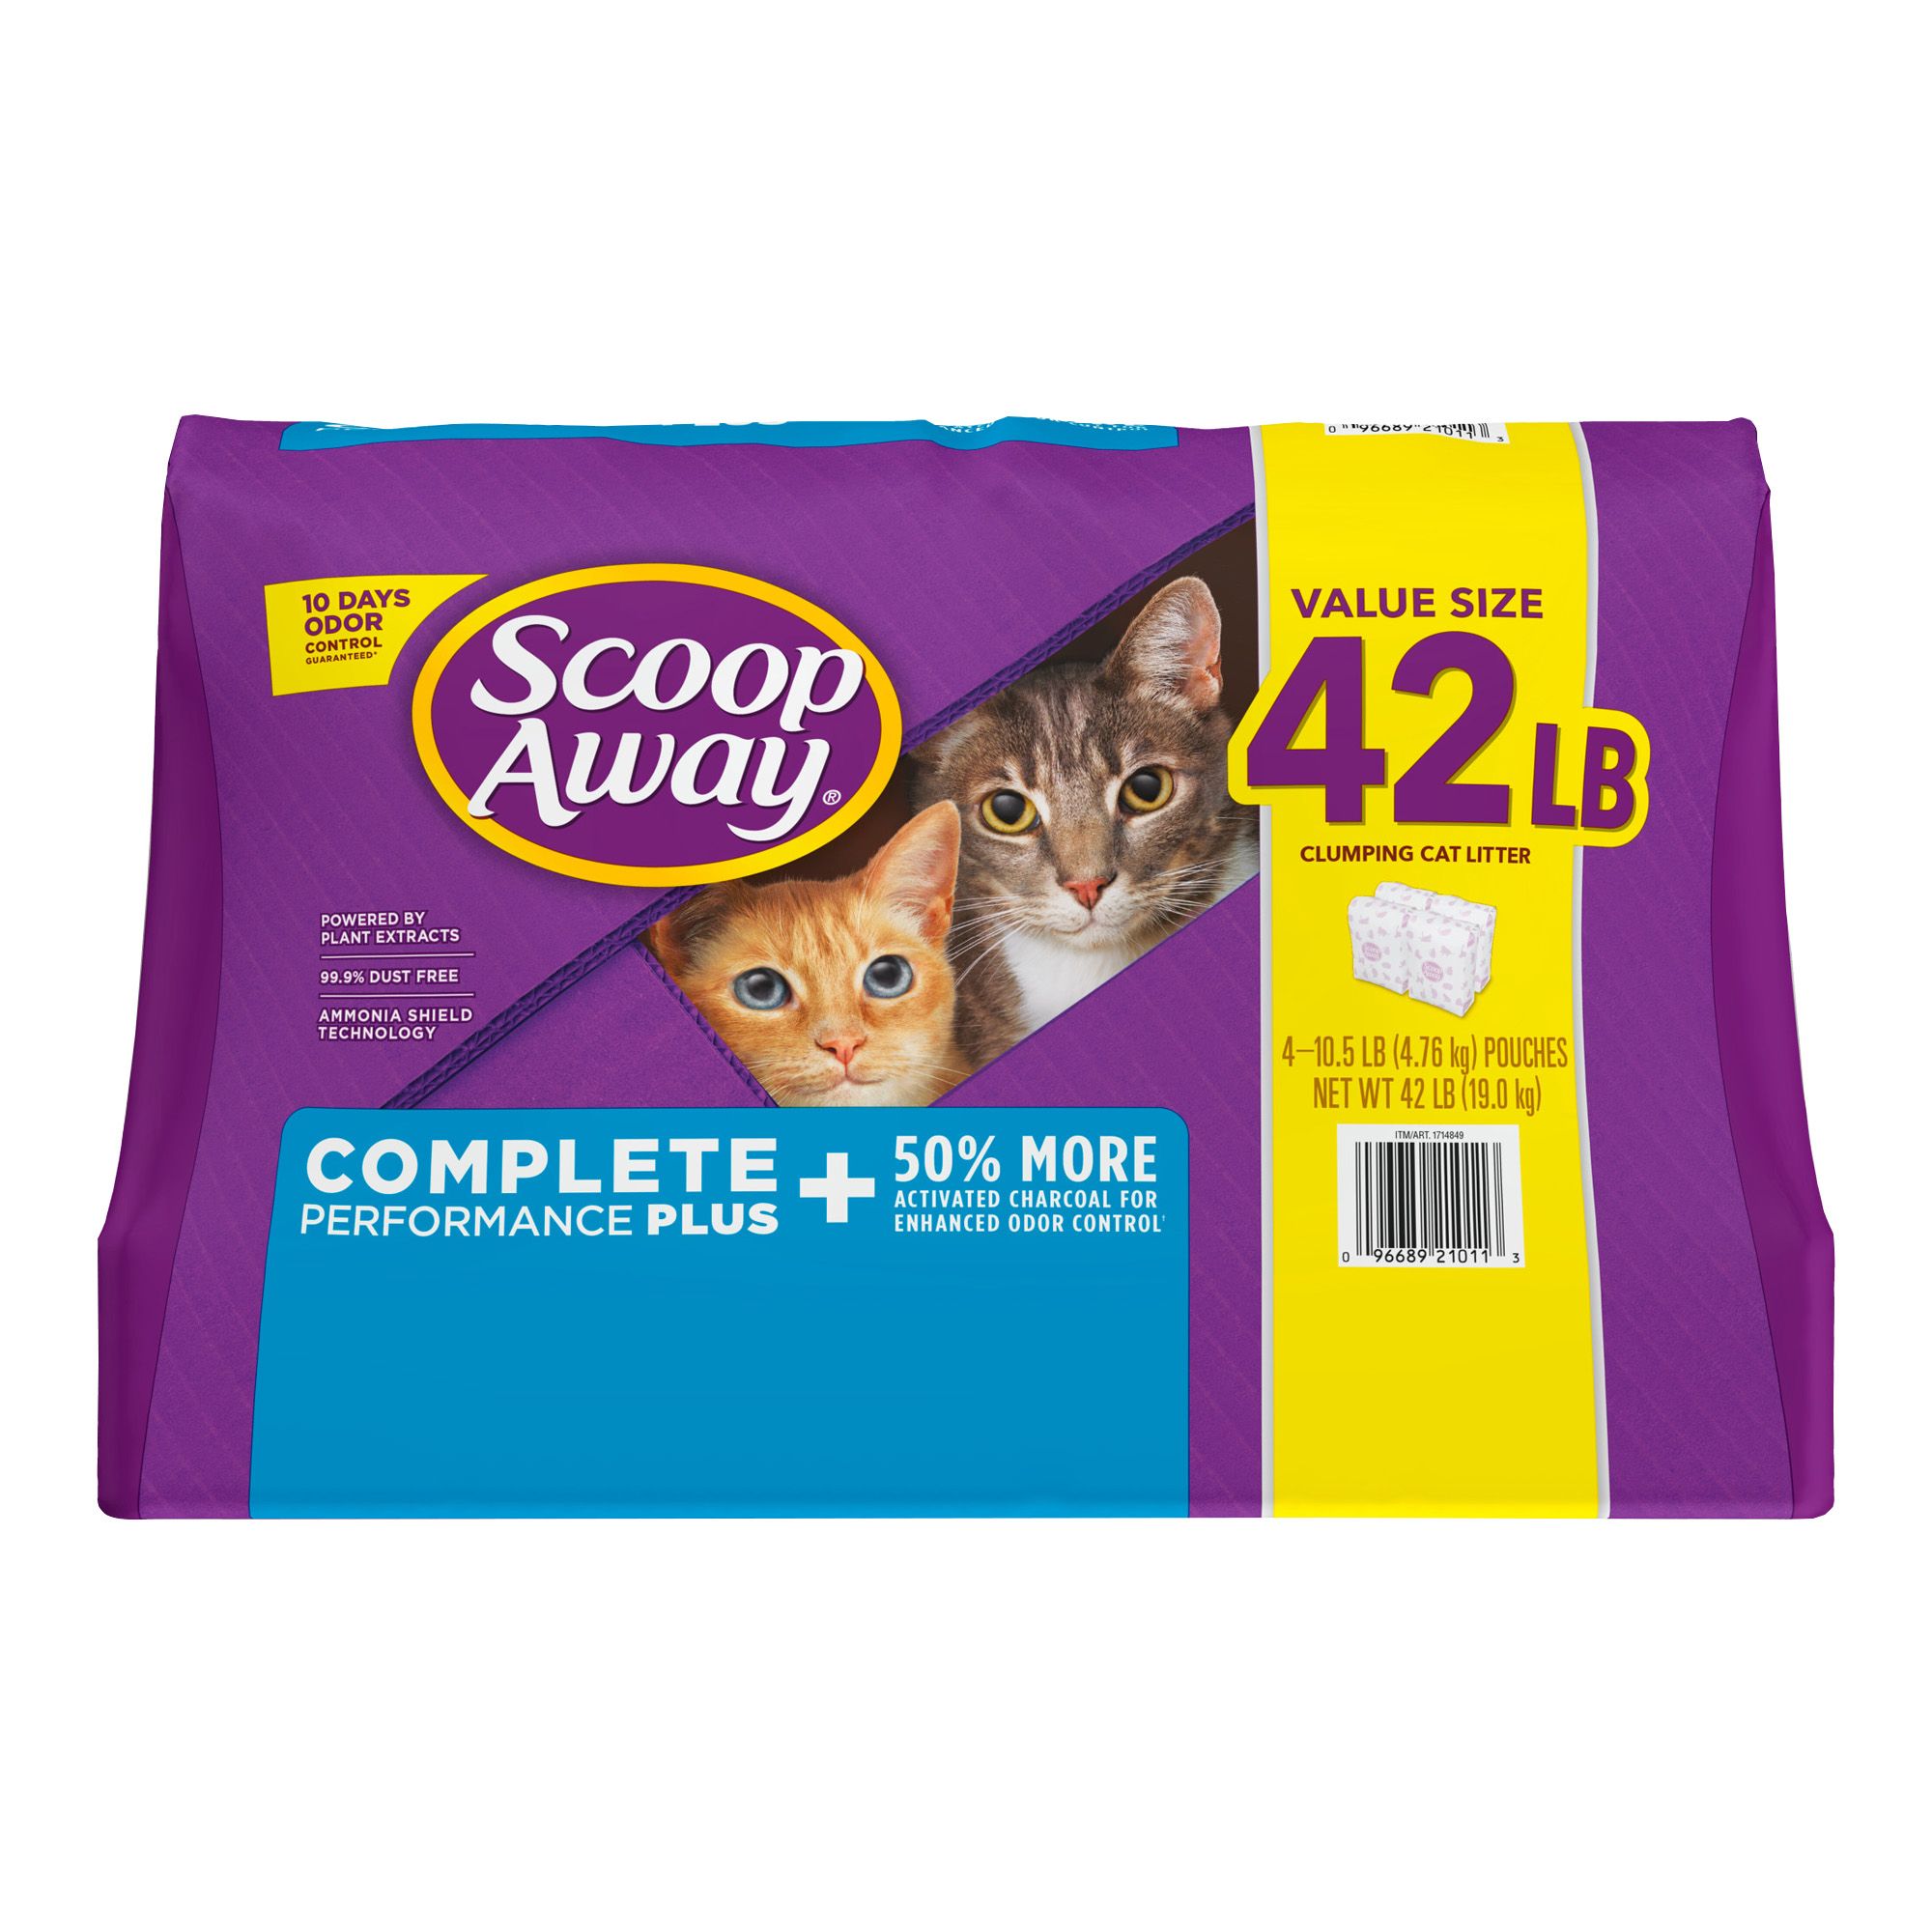 Scoop Away Complete Performance Plus Clumping Cat Litter, 42 lbs.